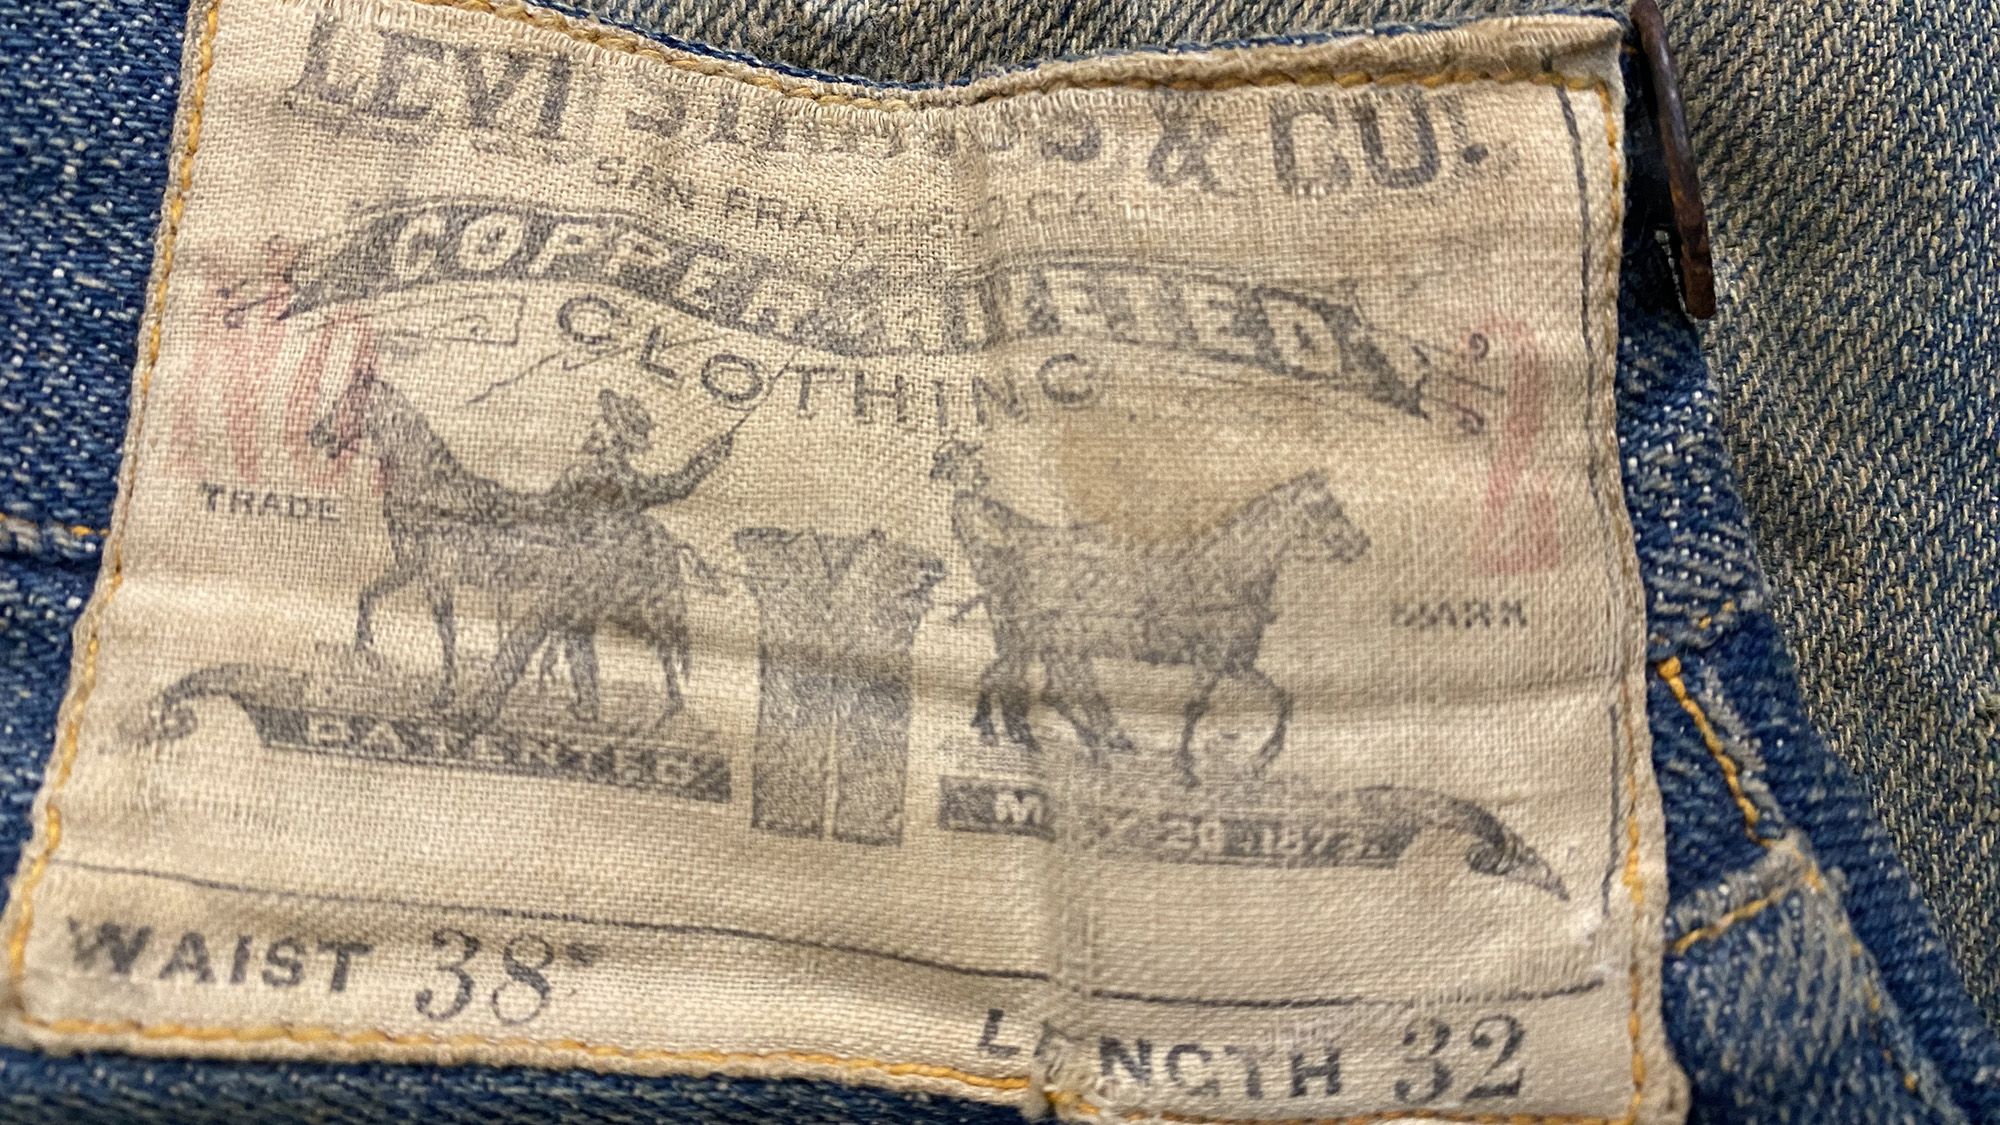 Durango Levi's collector to auction off 'oldest' pair of jeans